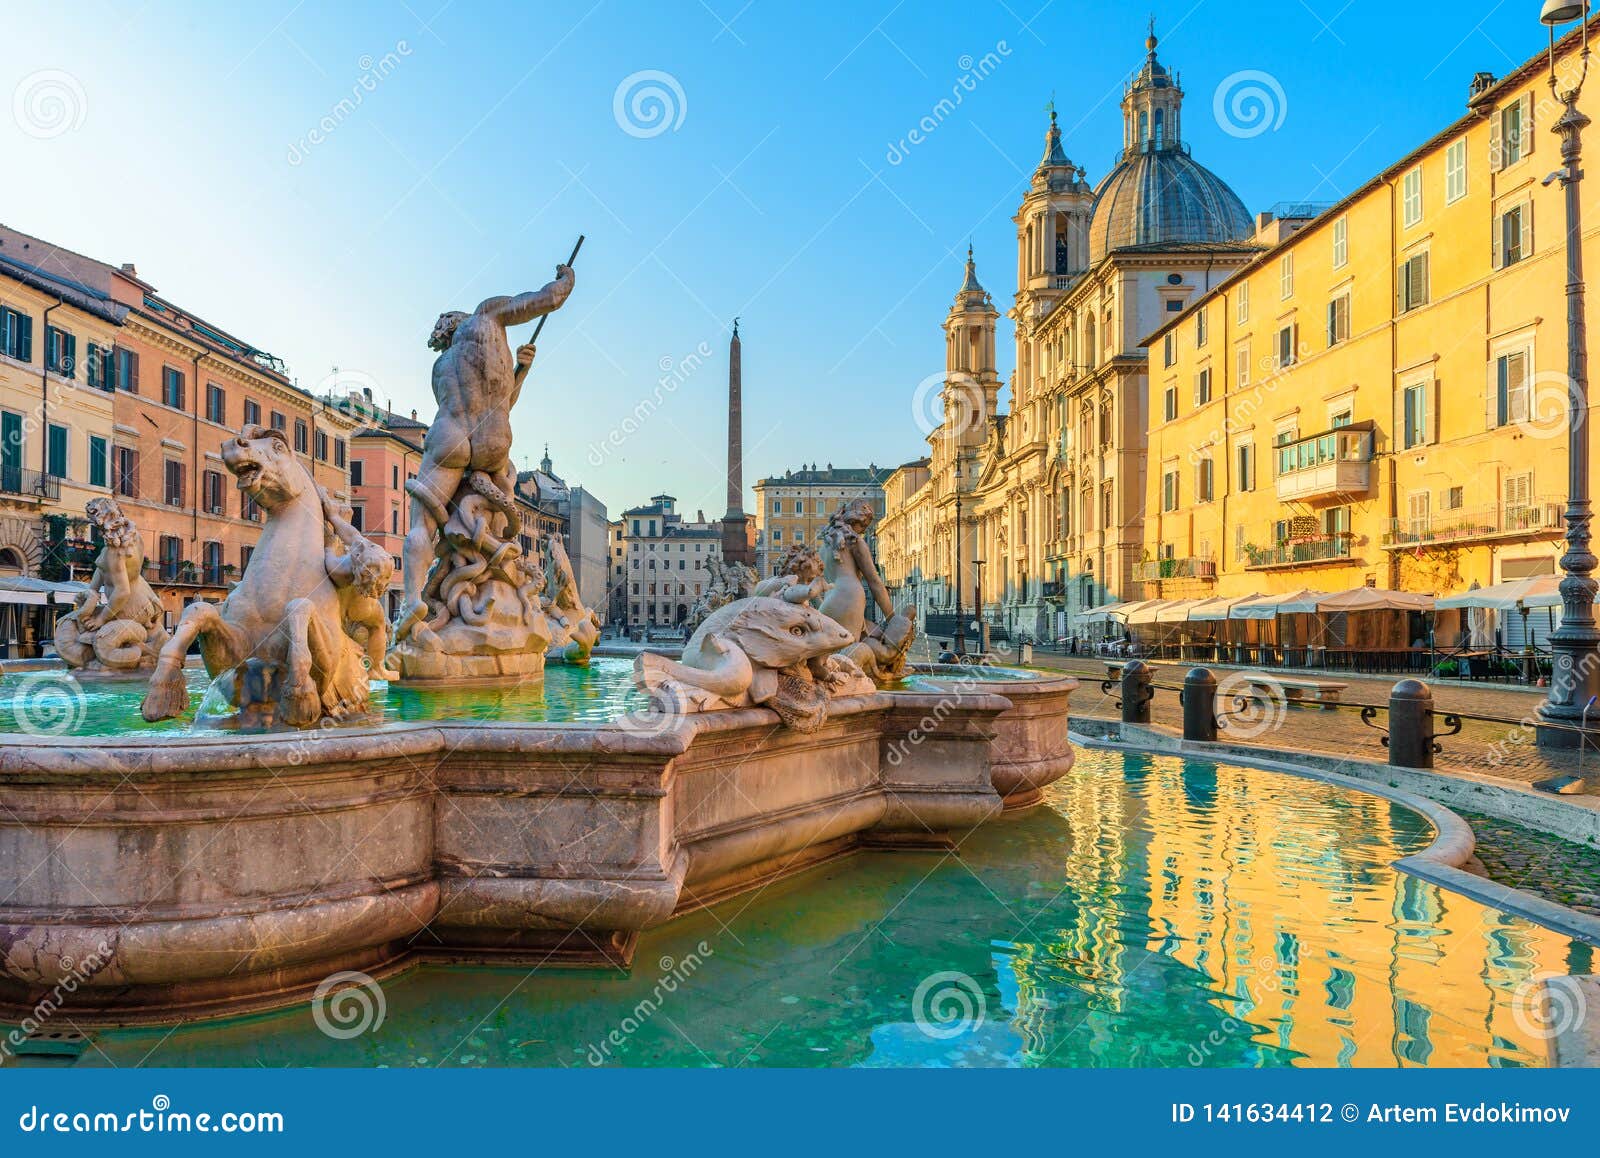 navona square or piazza navona in rome, italy with fountain. rome architecture and landmark at sunrise